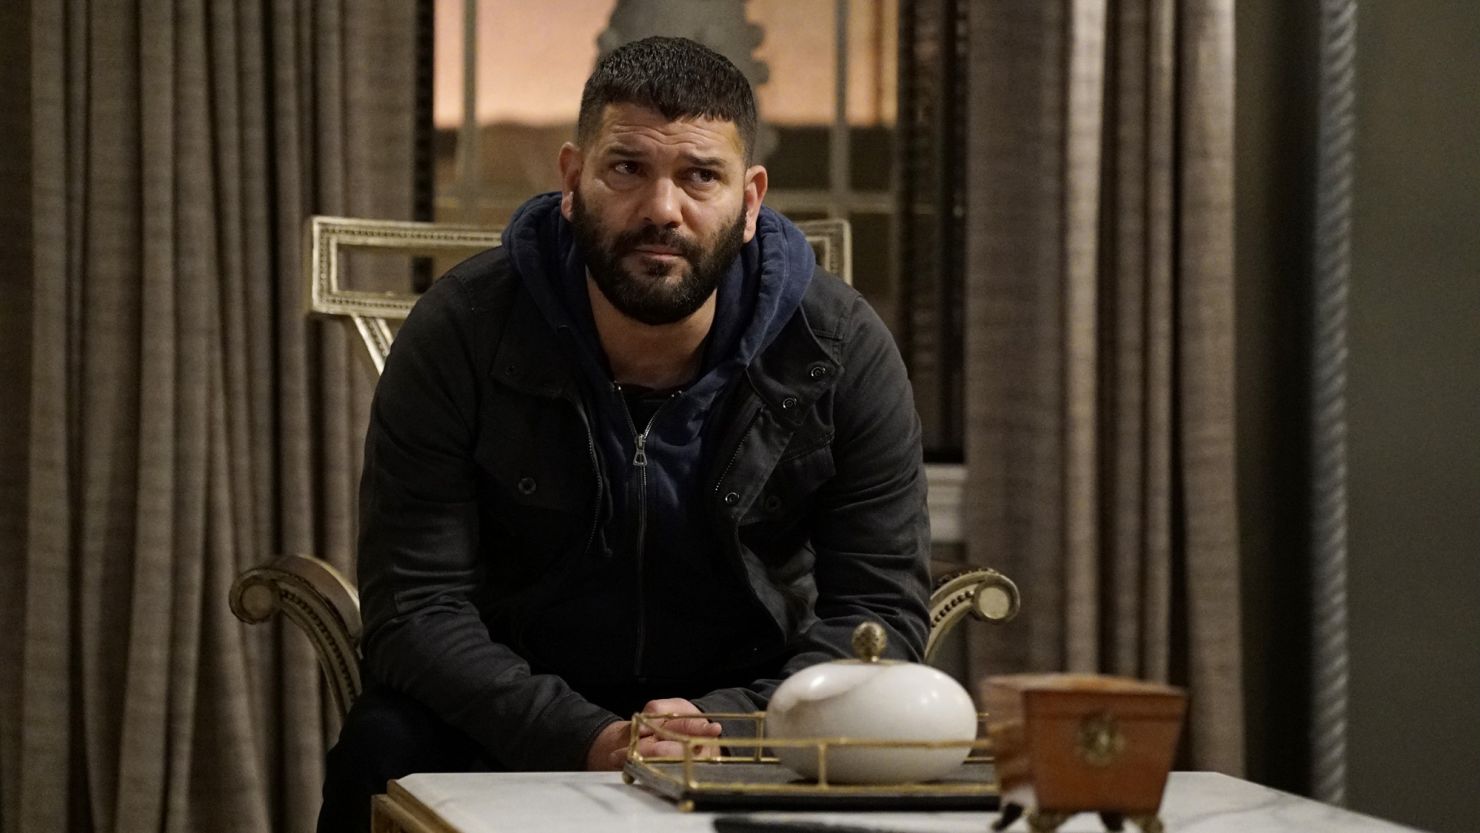 Guillermo Diaz plays Huck on the hit ABC series "Scandal."
